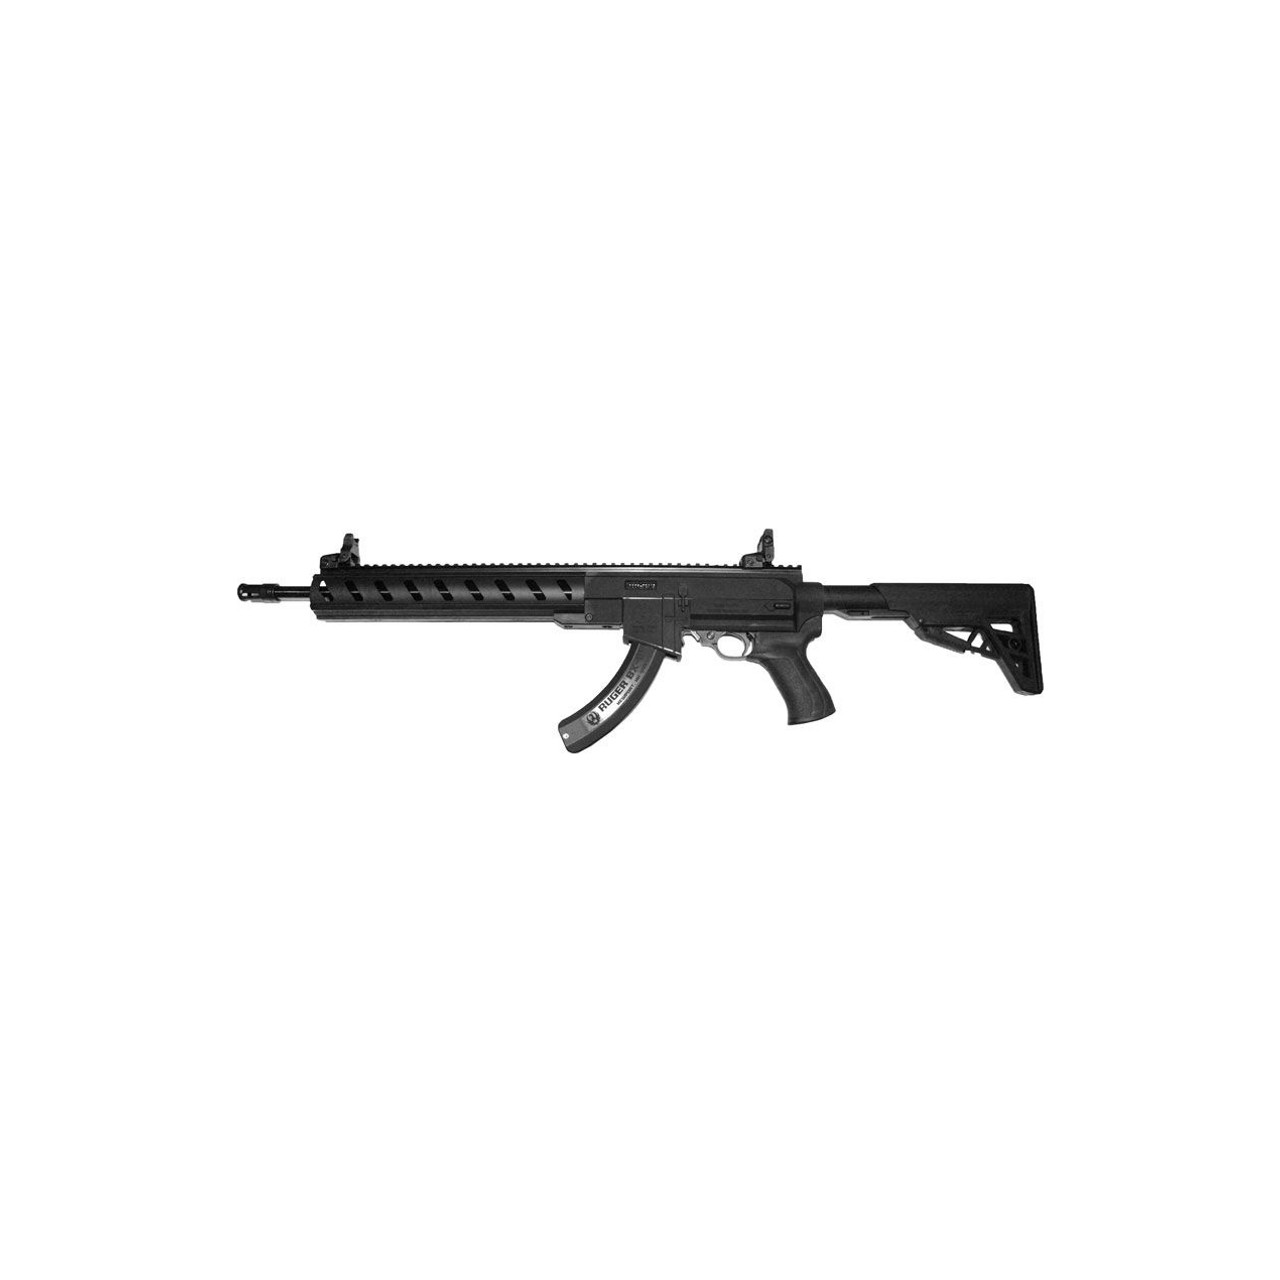 RUGER 10/22 TACTICAL 22 LR 16.13" 25-RD SEMI-AUTO RIFLE